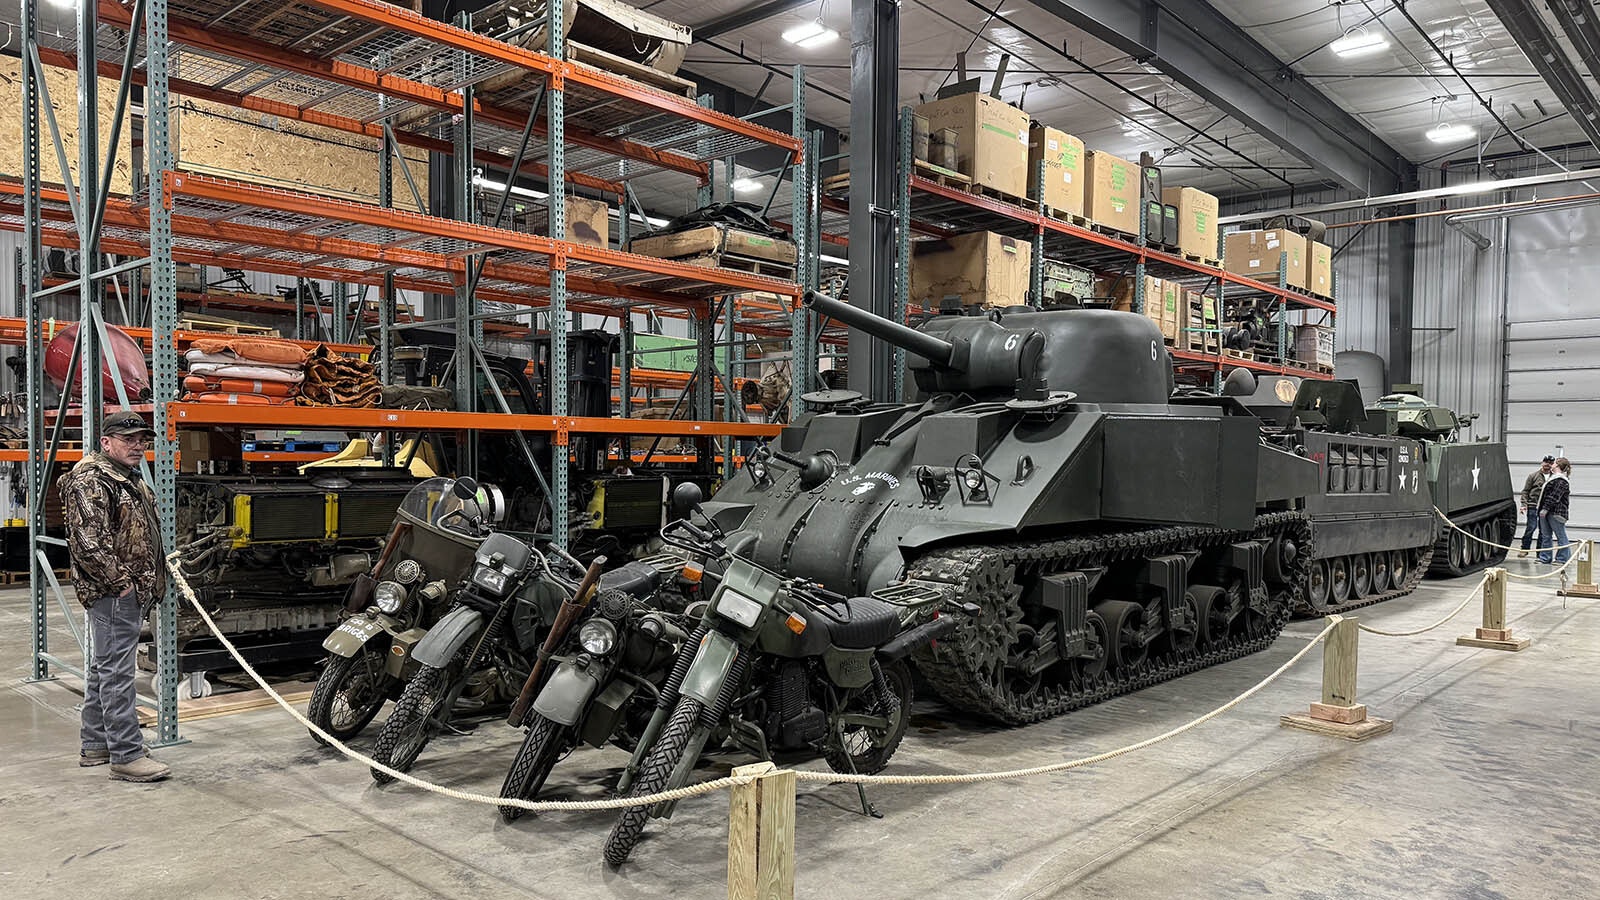 Motorcycles, a Sherman tank and other military vehicles parked along the shelves in the tank restoration shop's storage facility.